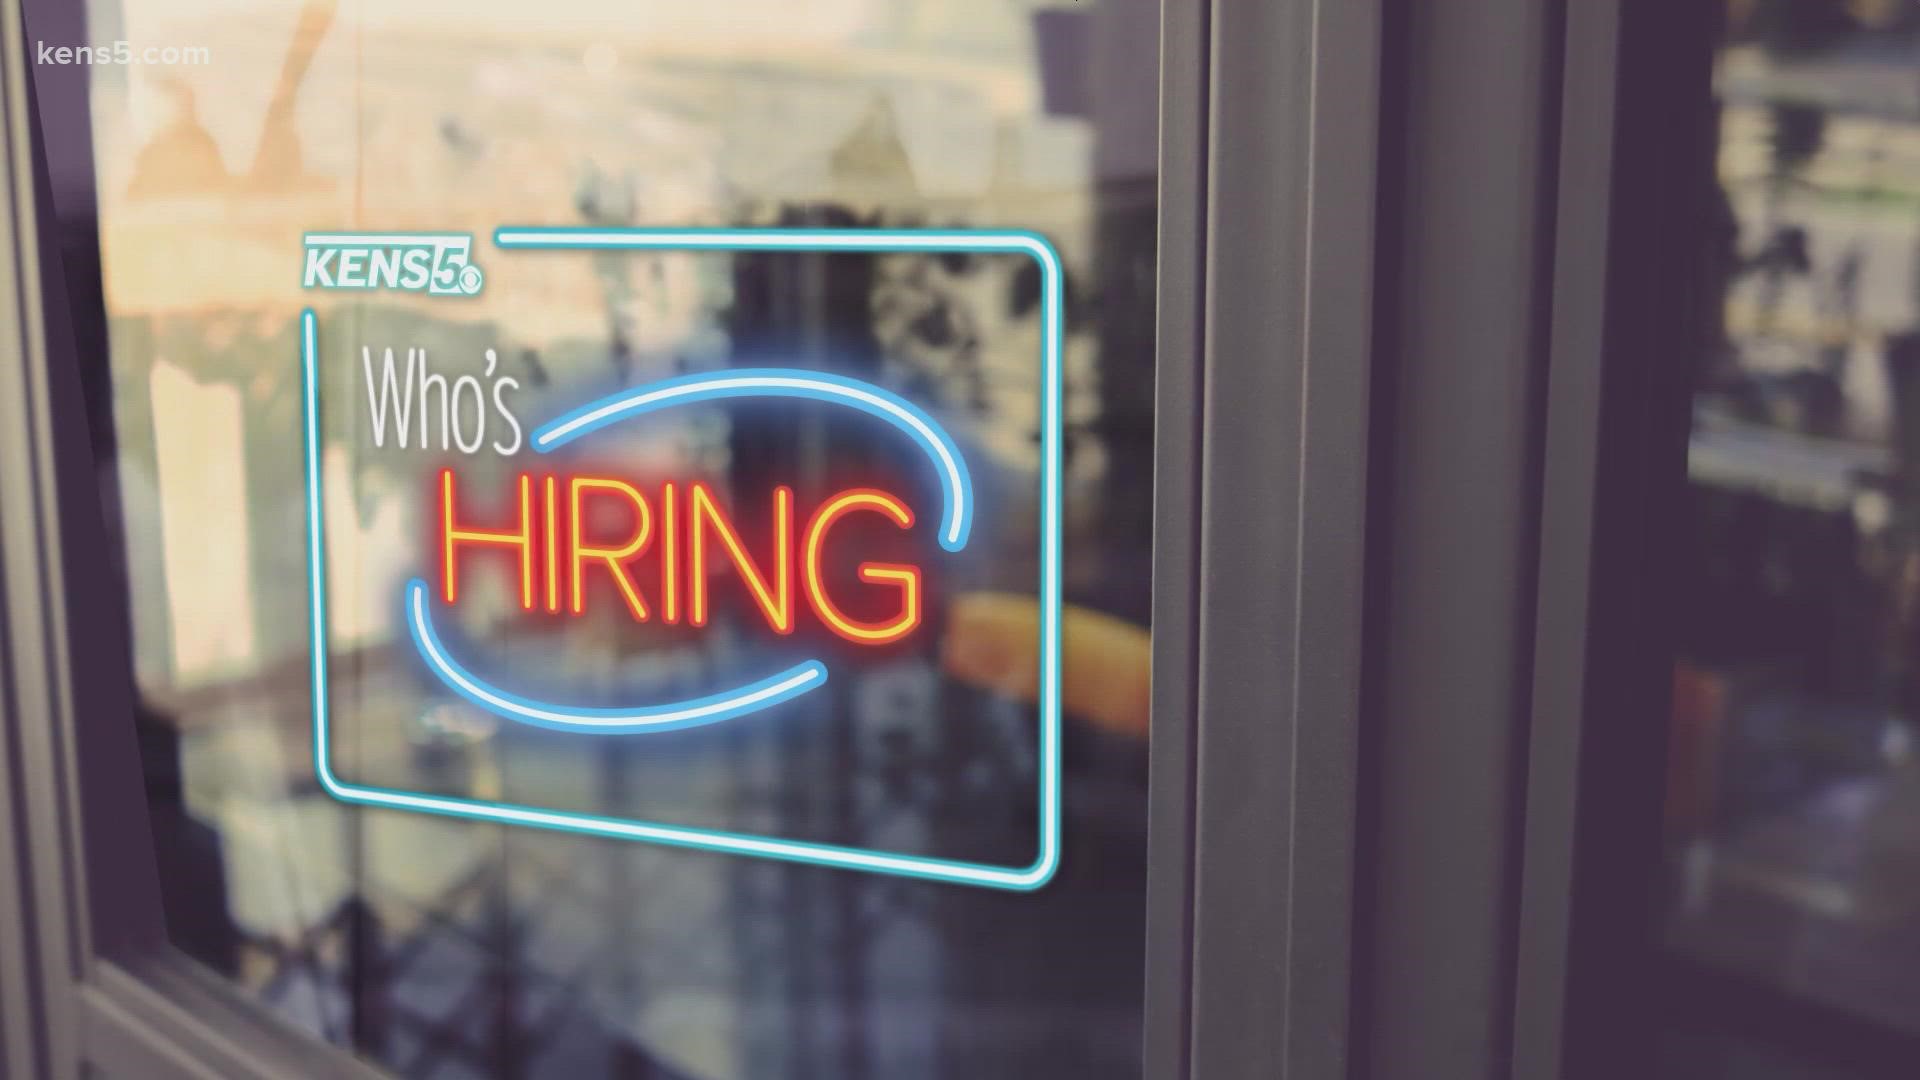 Here's a look at places hiring in the San Antonio area!